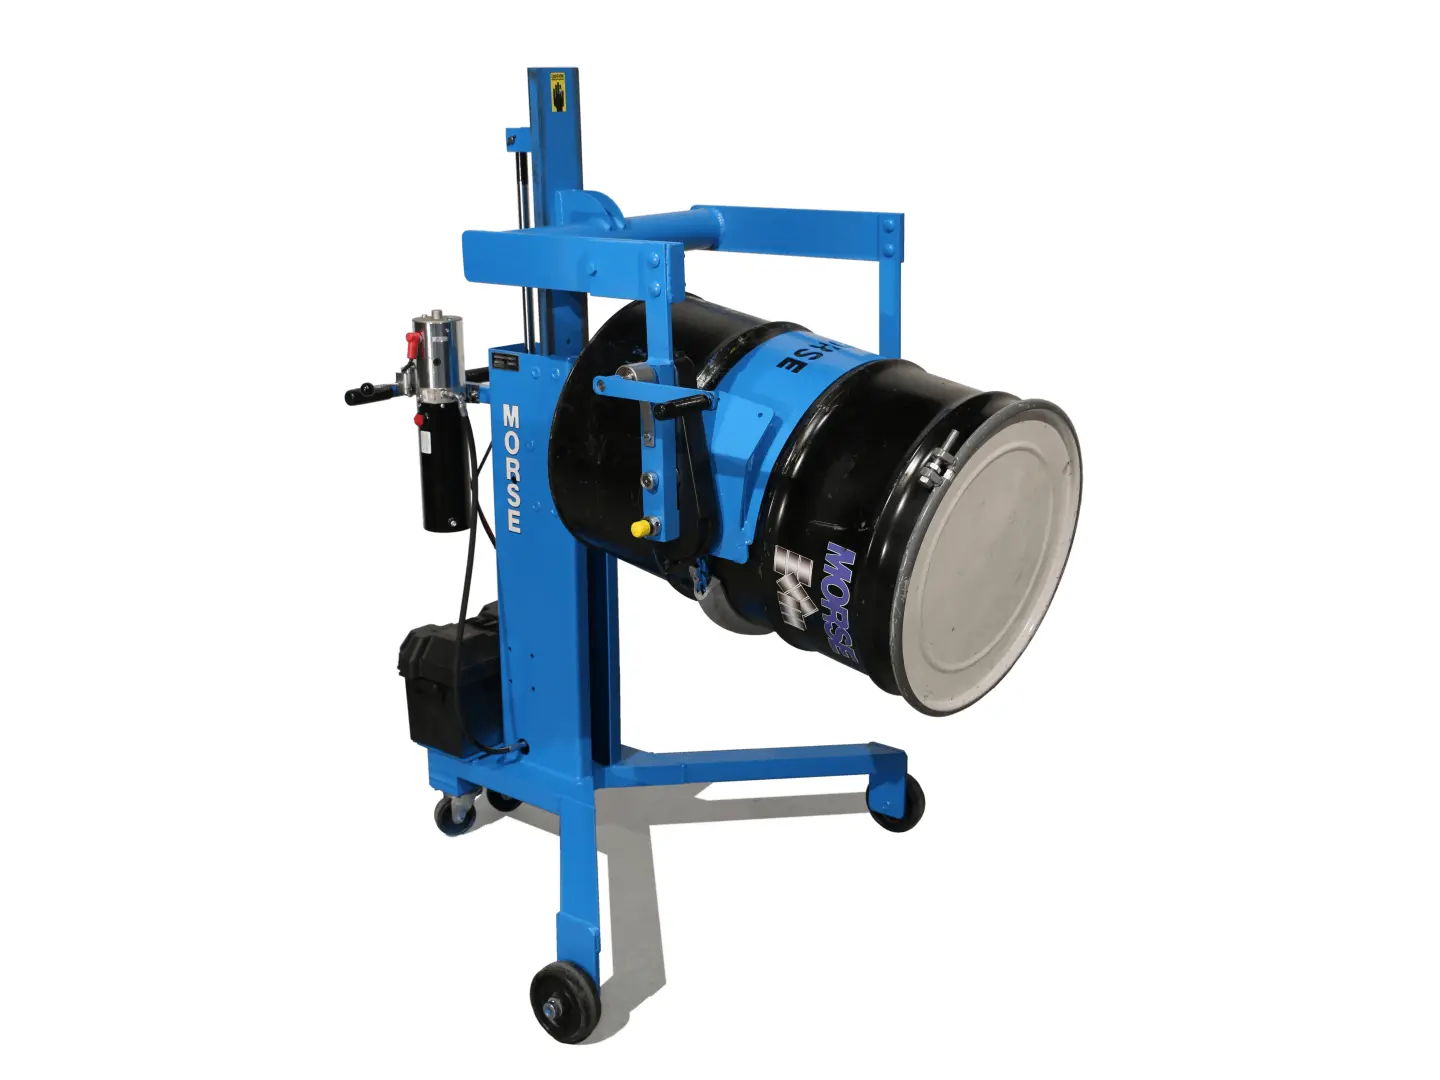 Model 82A-GT-125 Drum Palletizer has Battery Power Drum Lift and Hand Crank Drum Tilt. Shown with Tilt-Brake Option to automatically hold drum tilt angle.